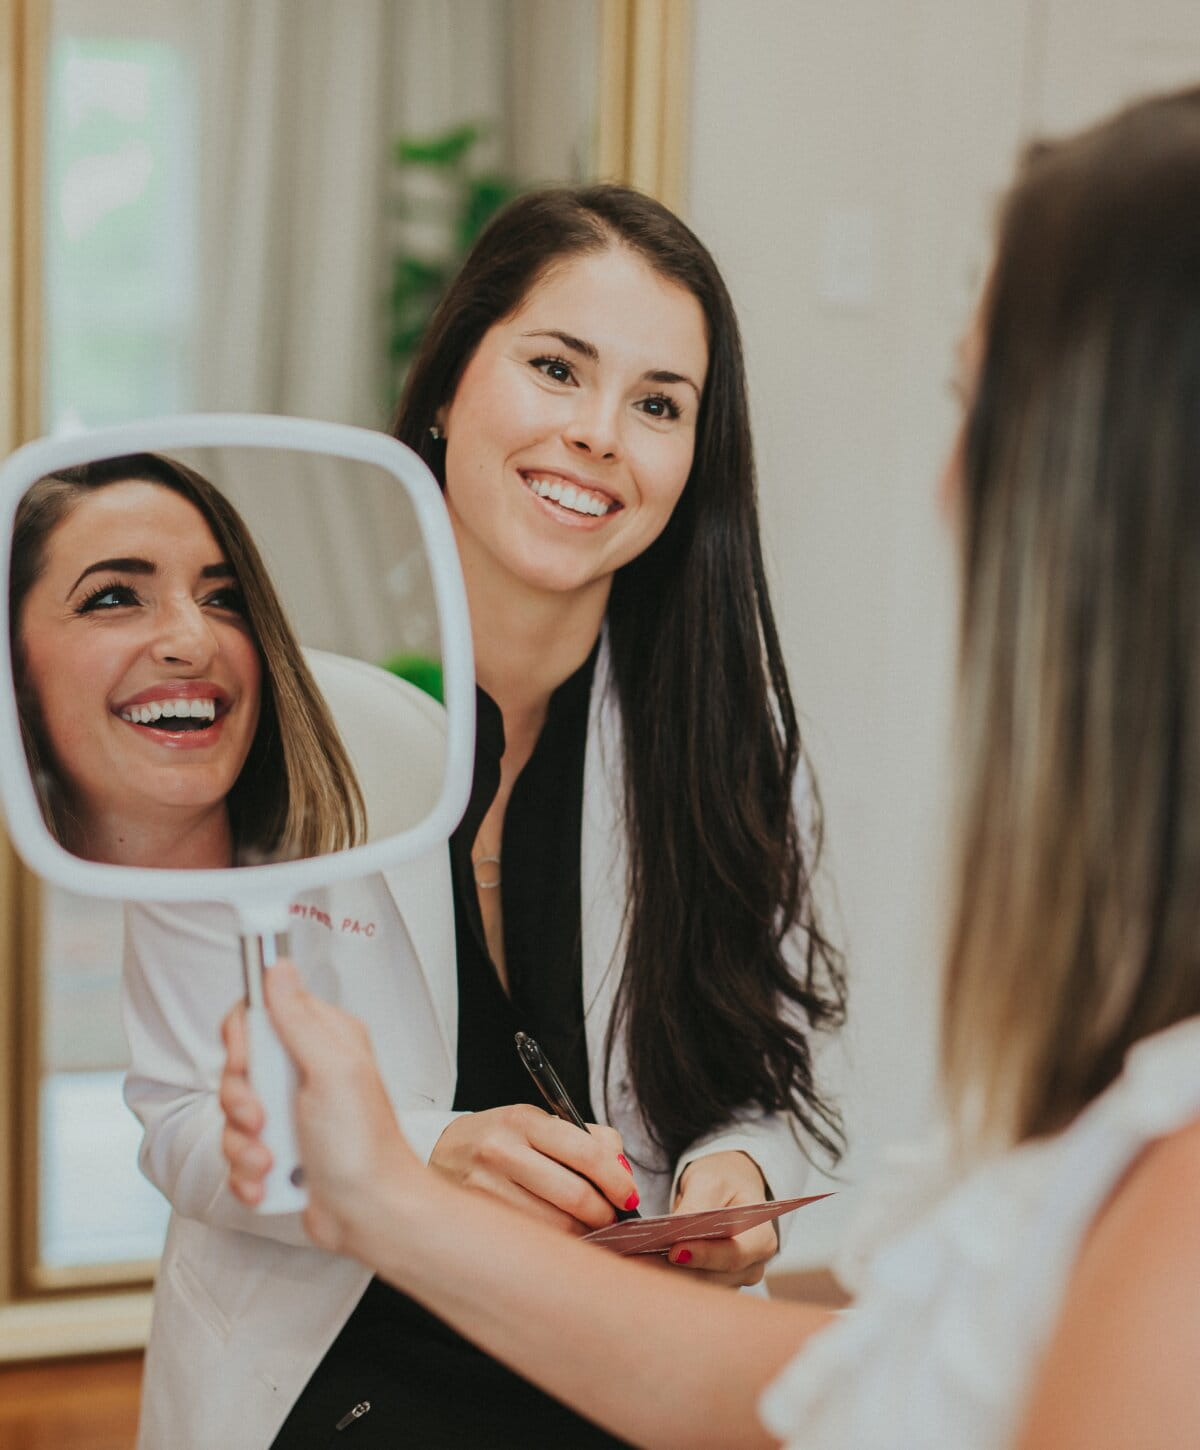 Wrinkle reduction consultation - woman smiling at reflection